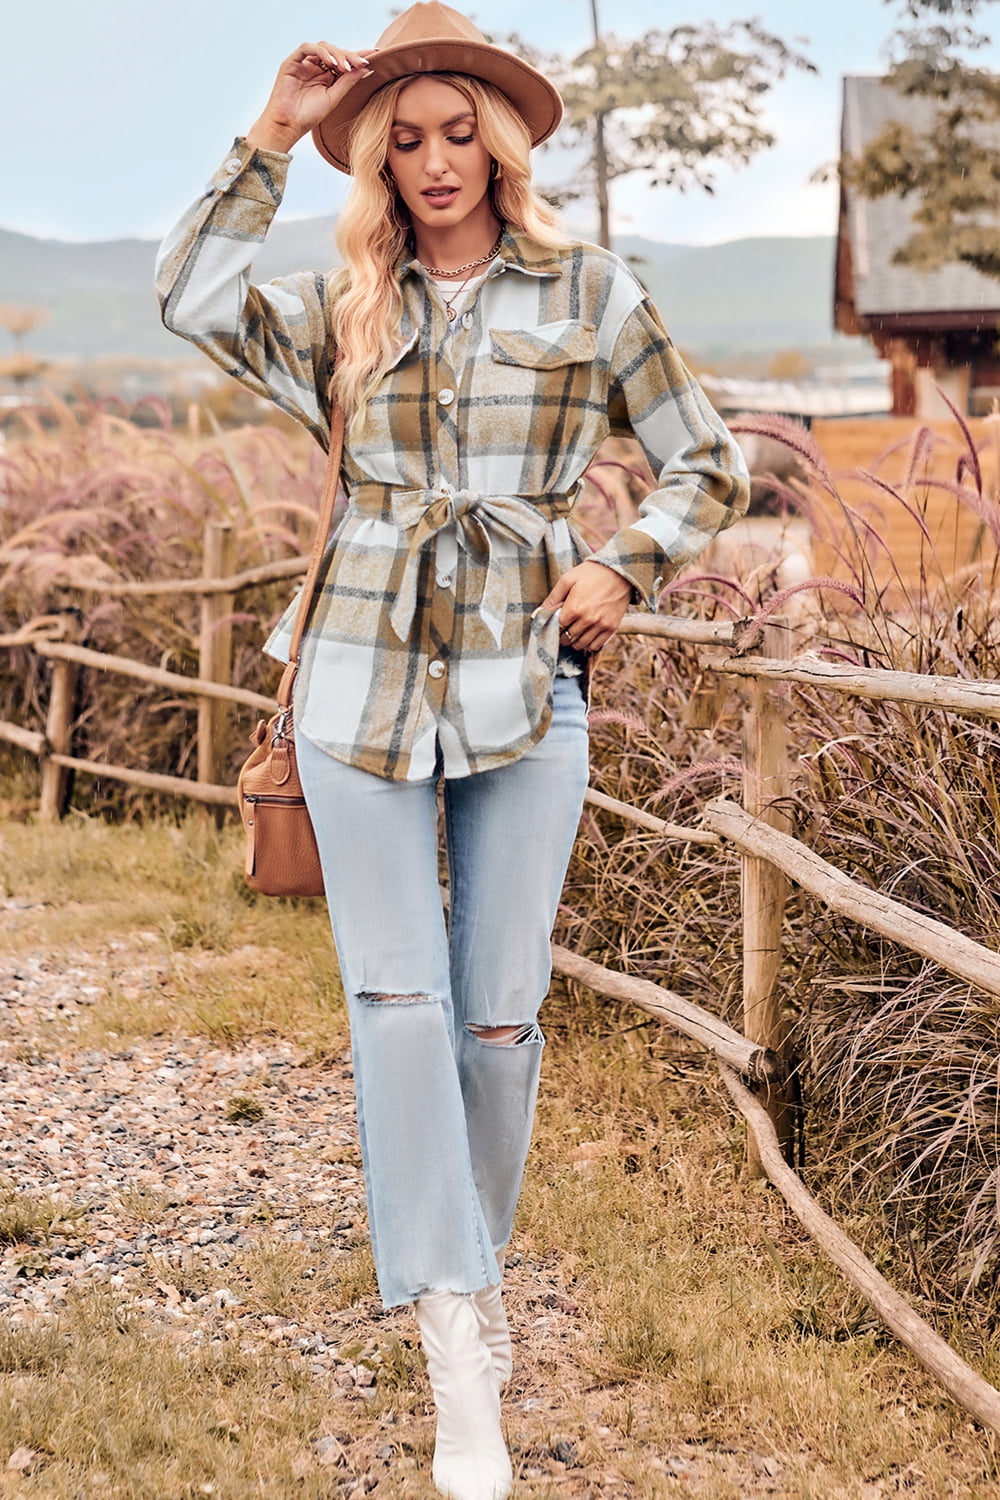 Plaid Collared Neck Bow Front Long Sleeve Jacket